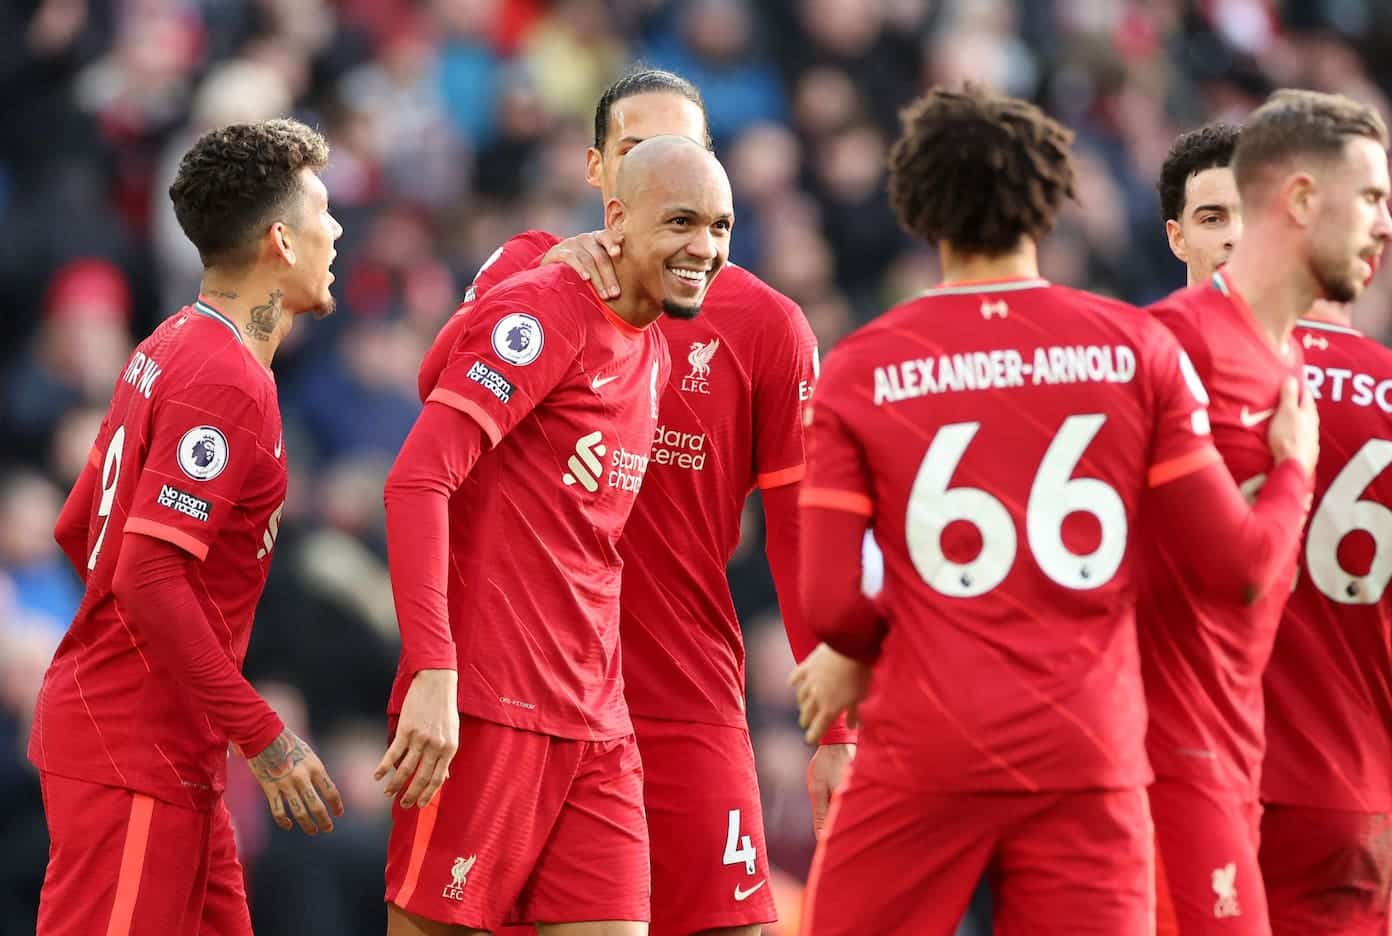 Liverpool 3-0 Brentford: Reds pick aparts Bees to go second in Premier League